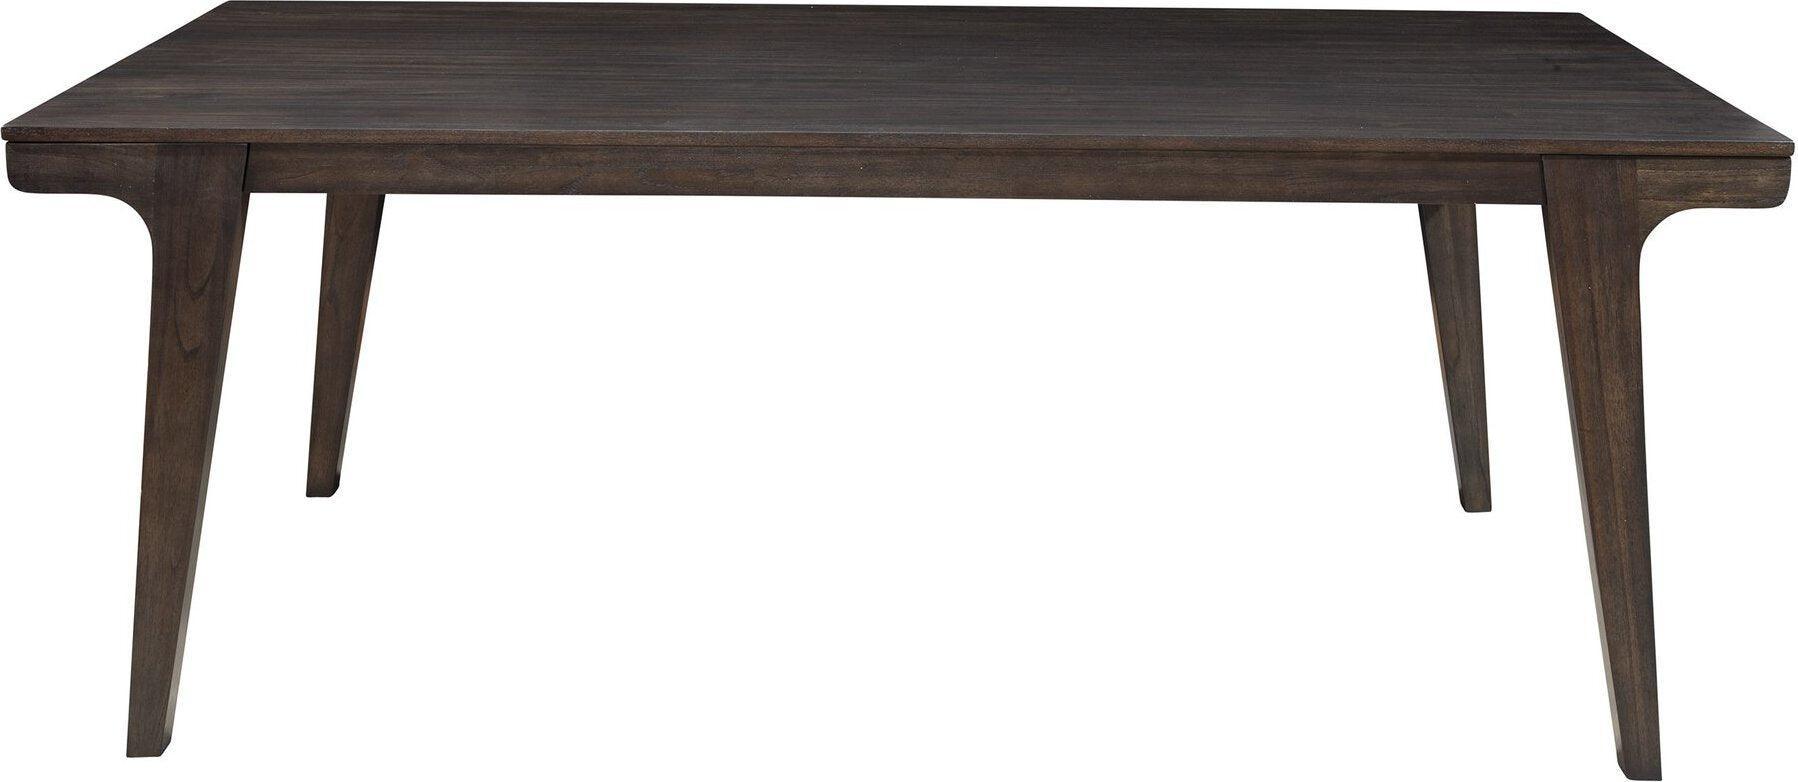 Alpine Furniture Dining Tables - Olejo Fixed Top Dining Table Chocolate